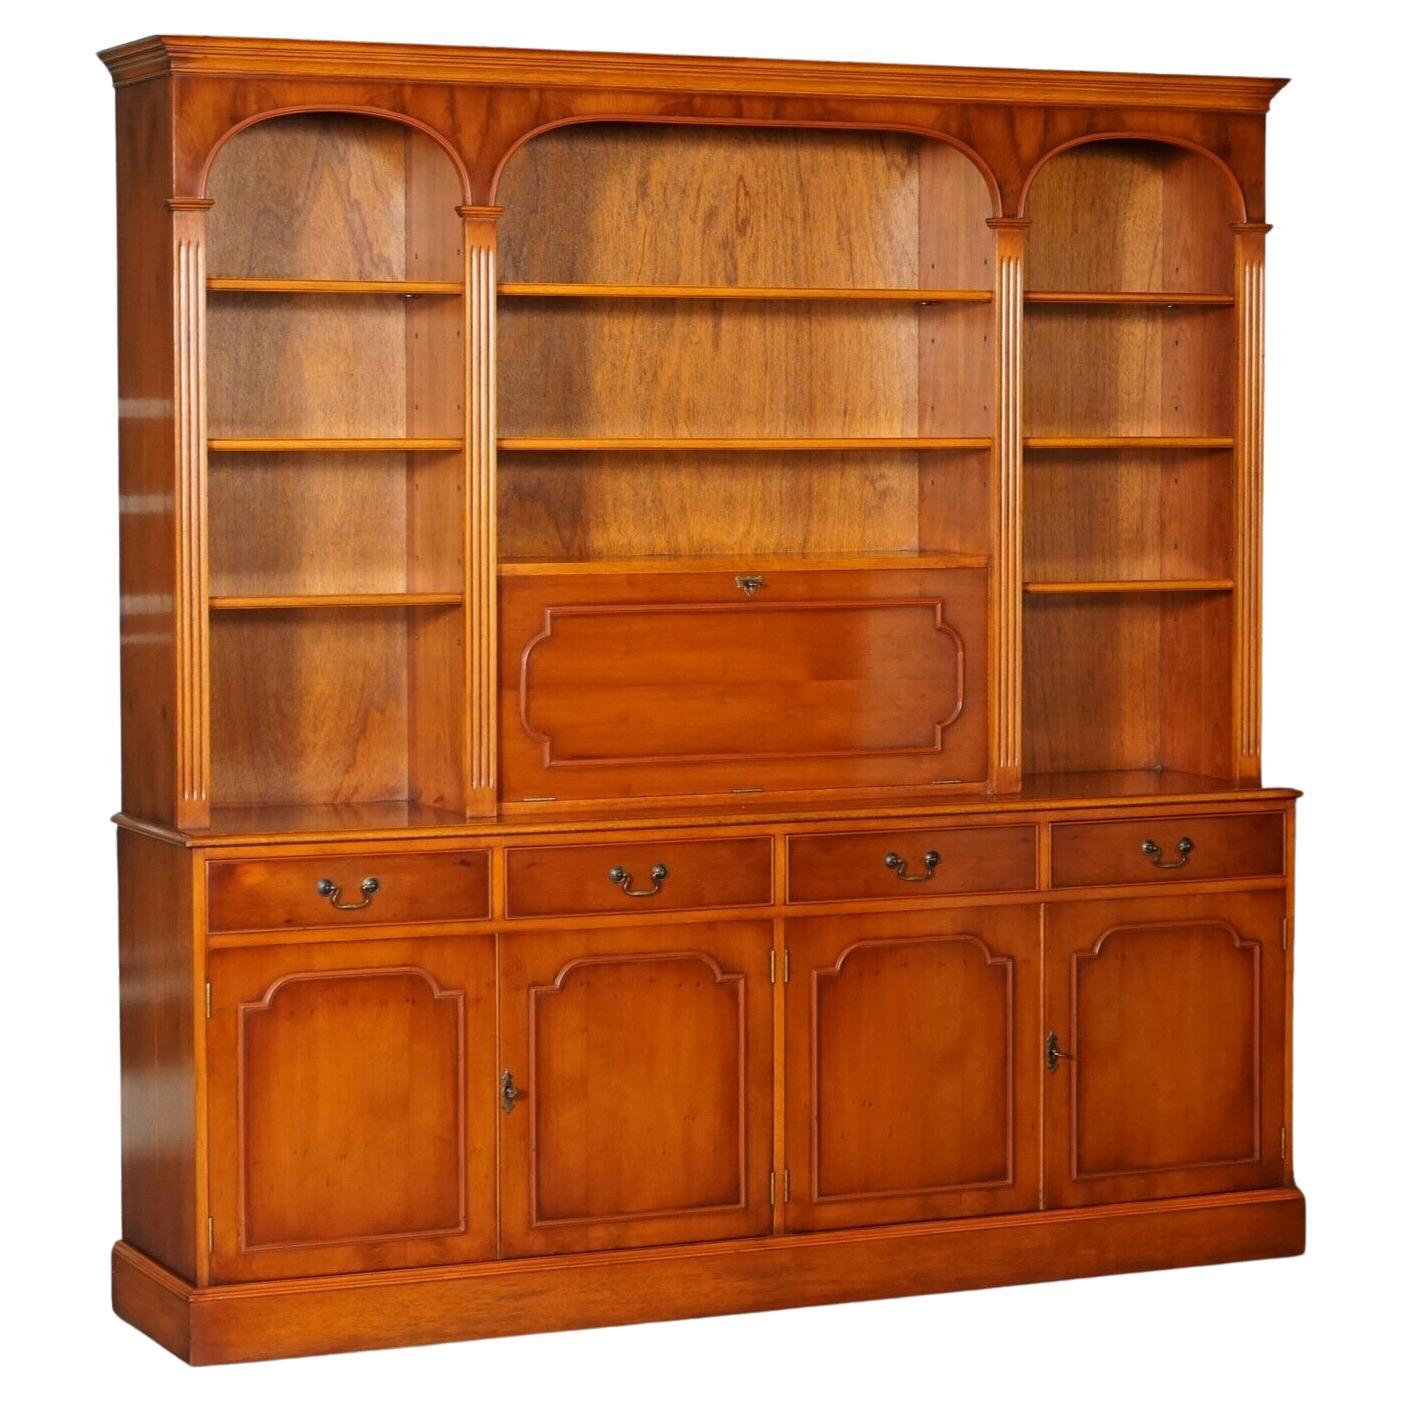 Flamed Yew Wood Bradley England Bank Library Bookcase Cupboard with Lights For Sale